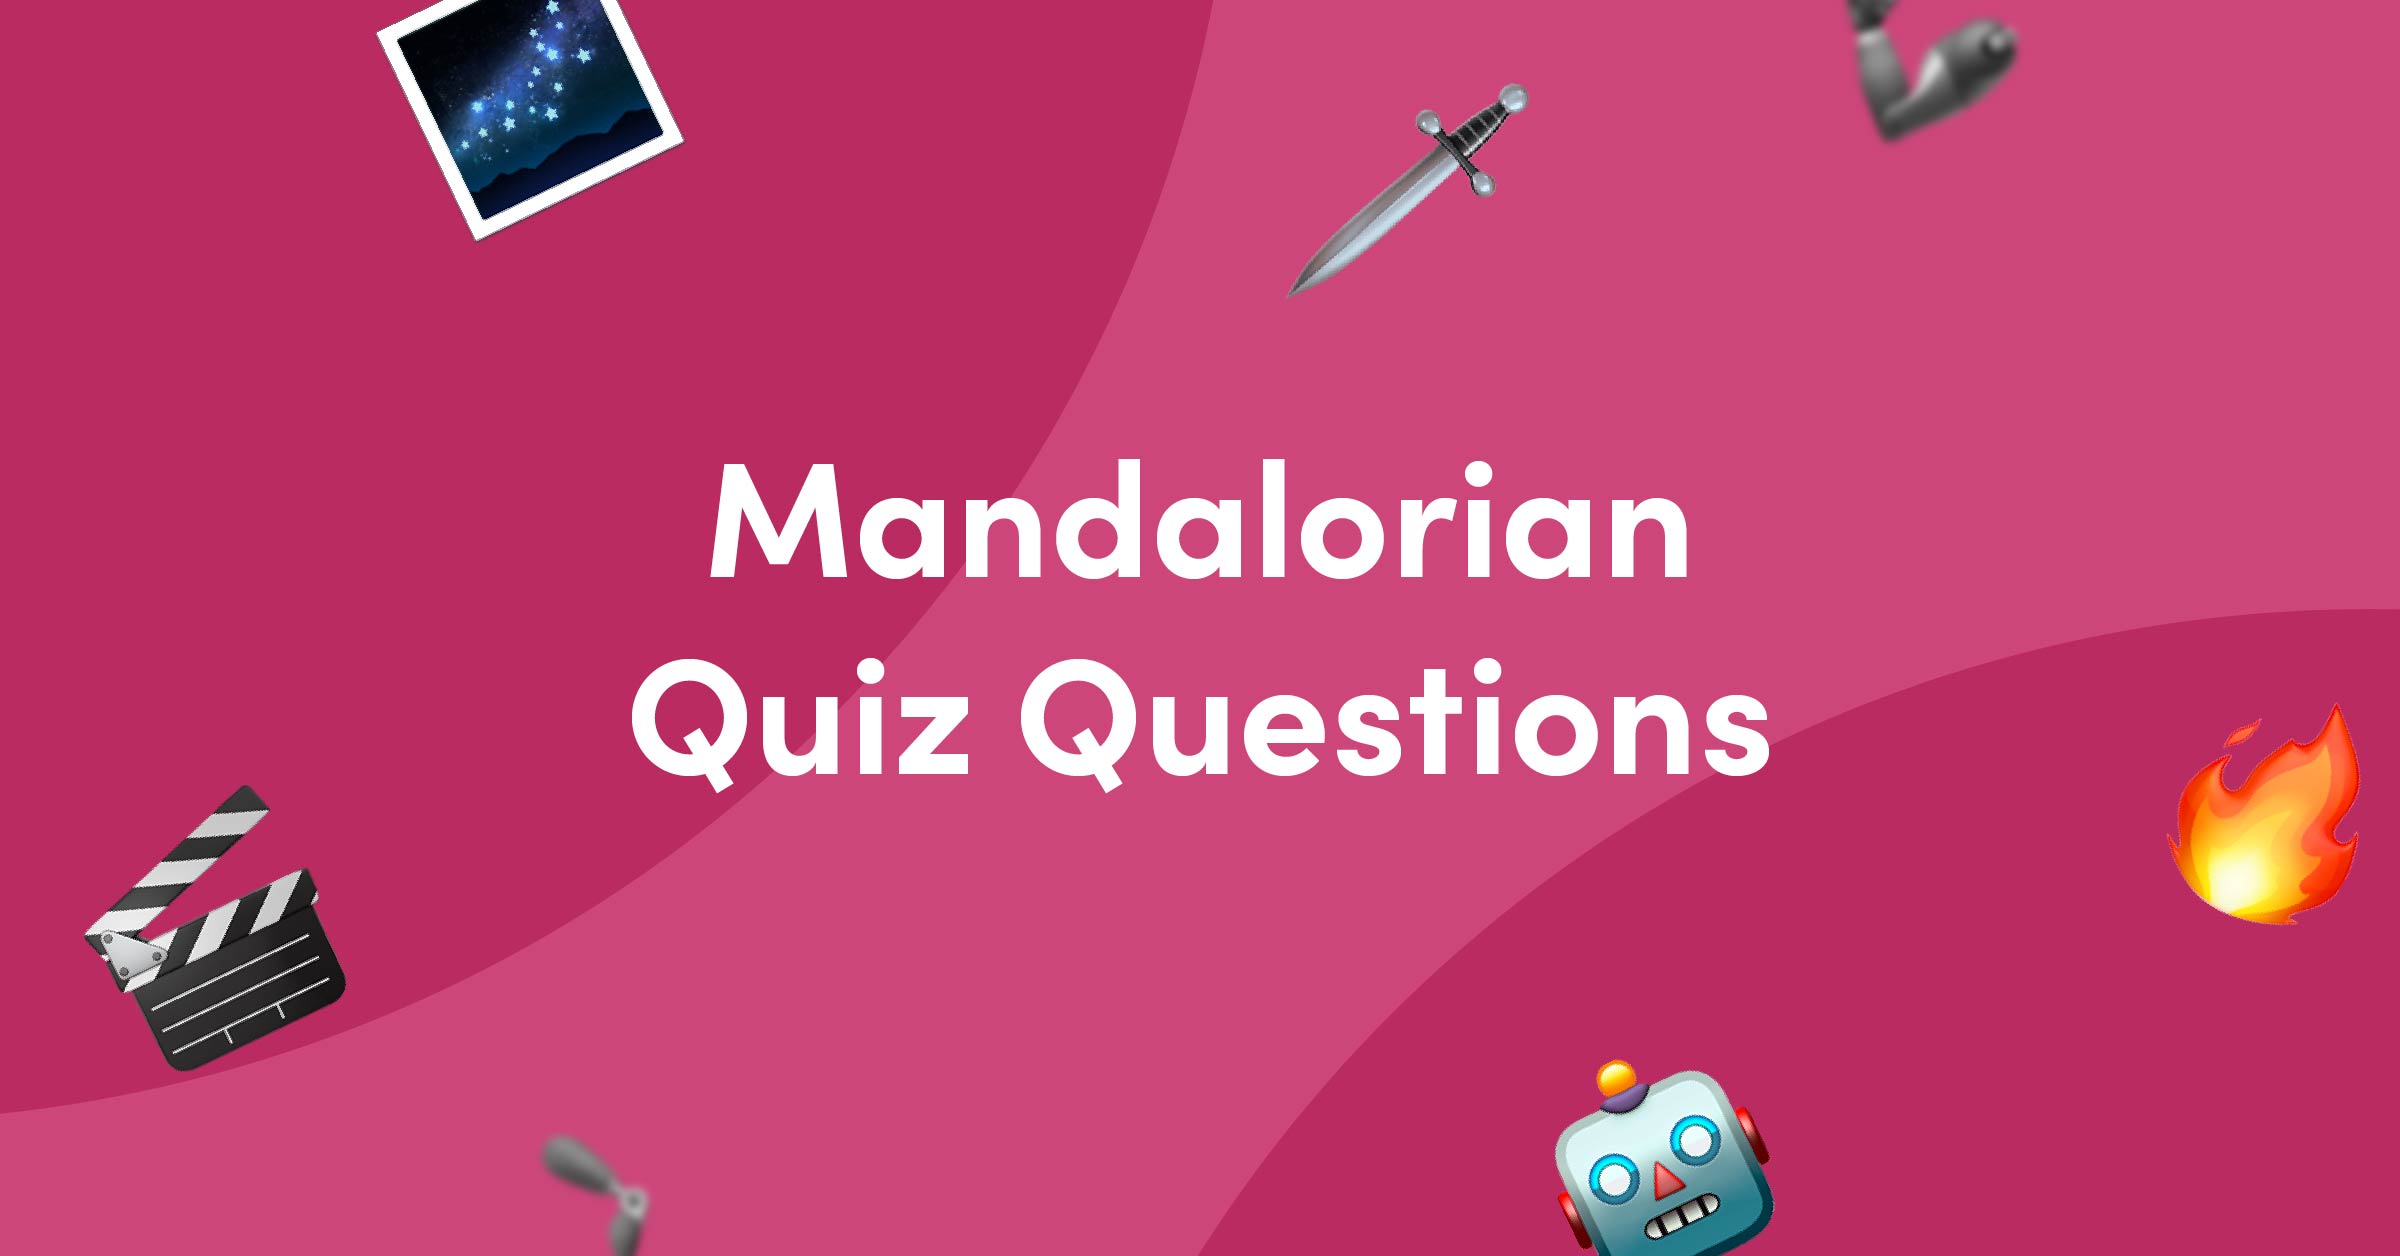 Space emojis on a pink background for The Mandalorian quiz questions and answers